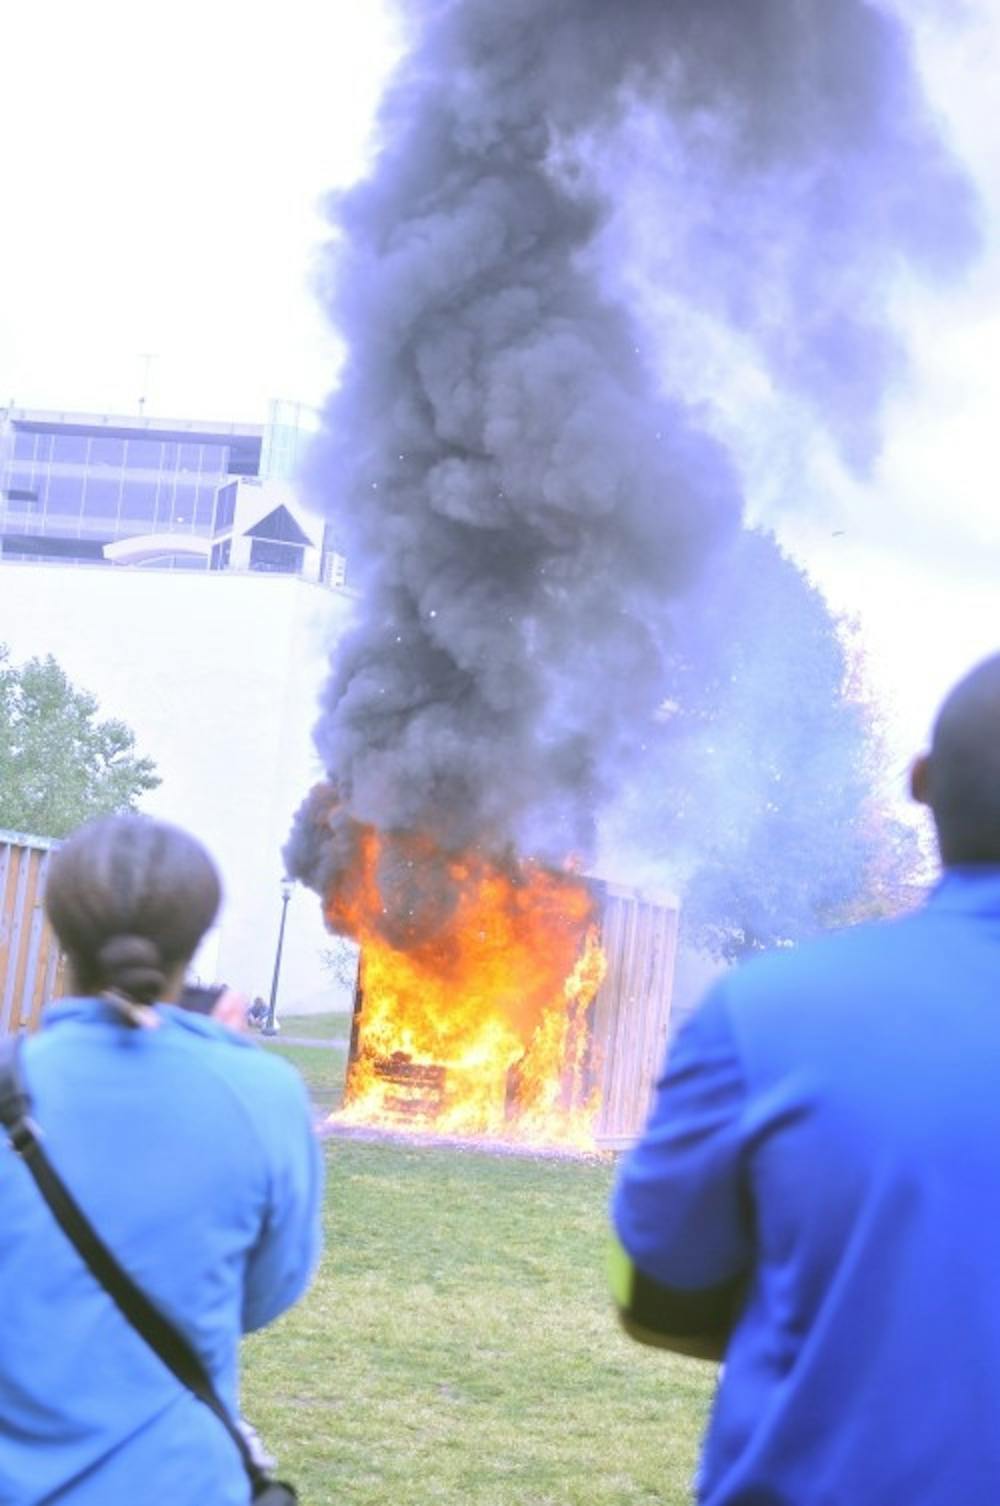 	On Friday,  the University of Pennsylvania’s Divison of Public Safety and the Philadelphia Fire Department held a Campus Fire Safety and Emergency Preparedness Day, which included a safety fair and a side-by-side Burn/Sprinkler demonstration. 